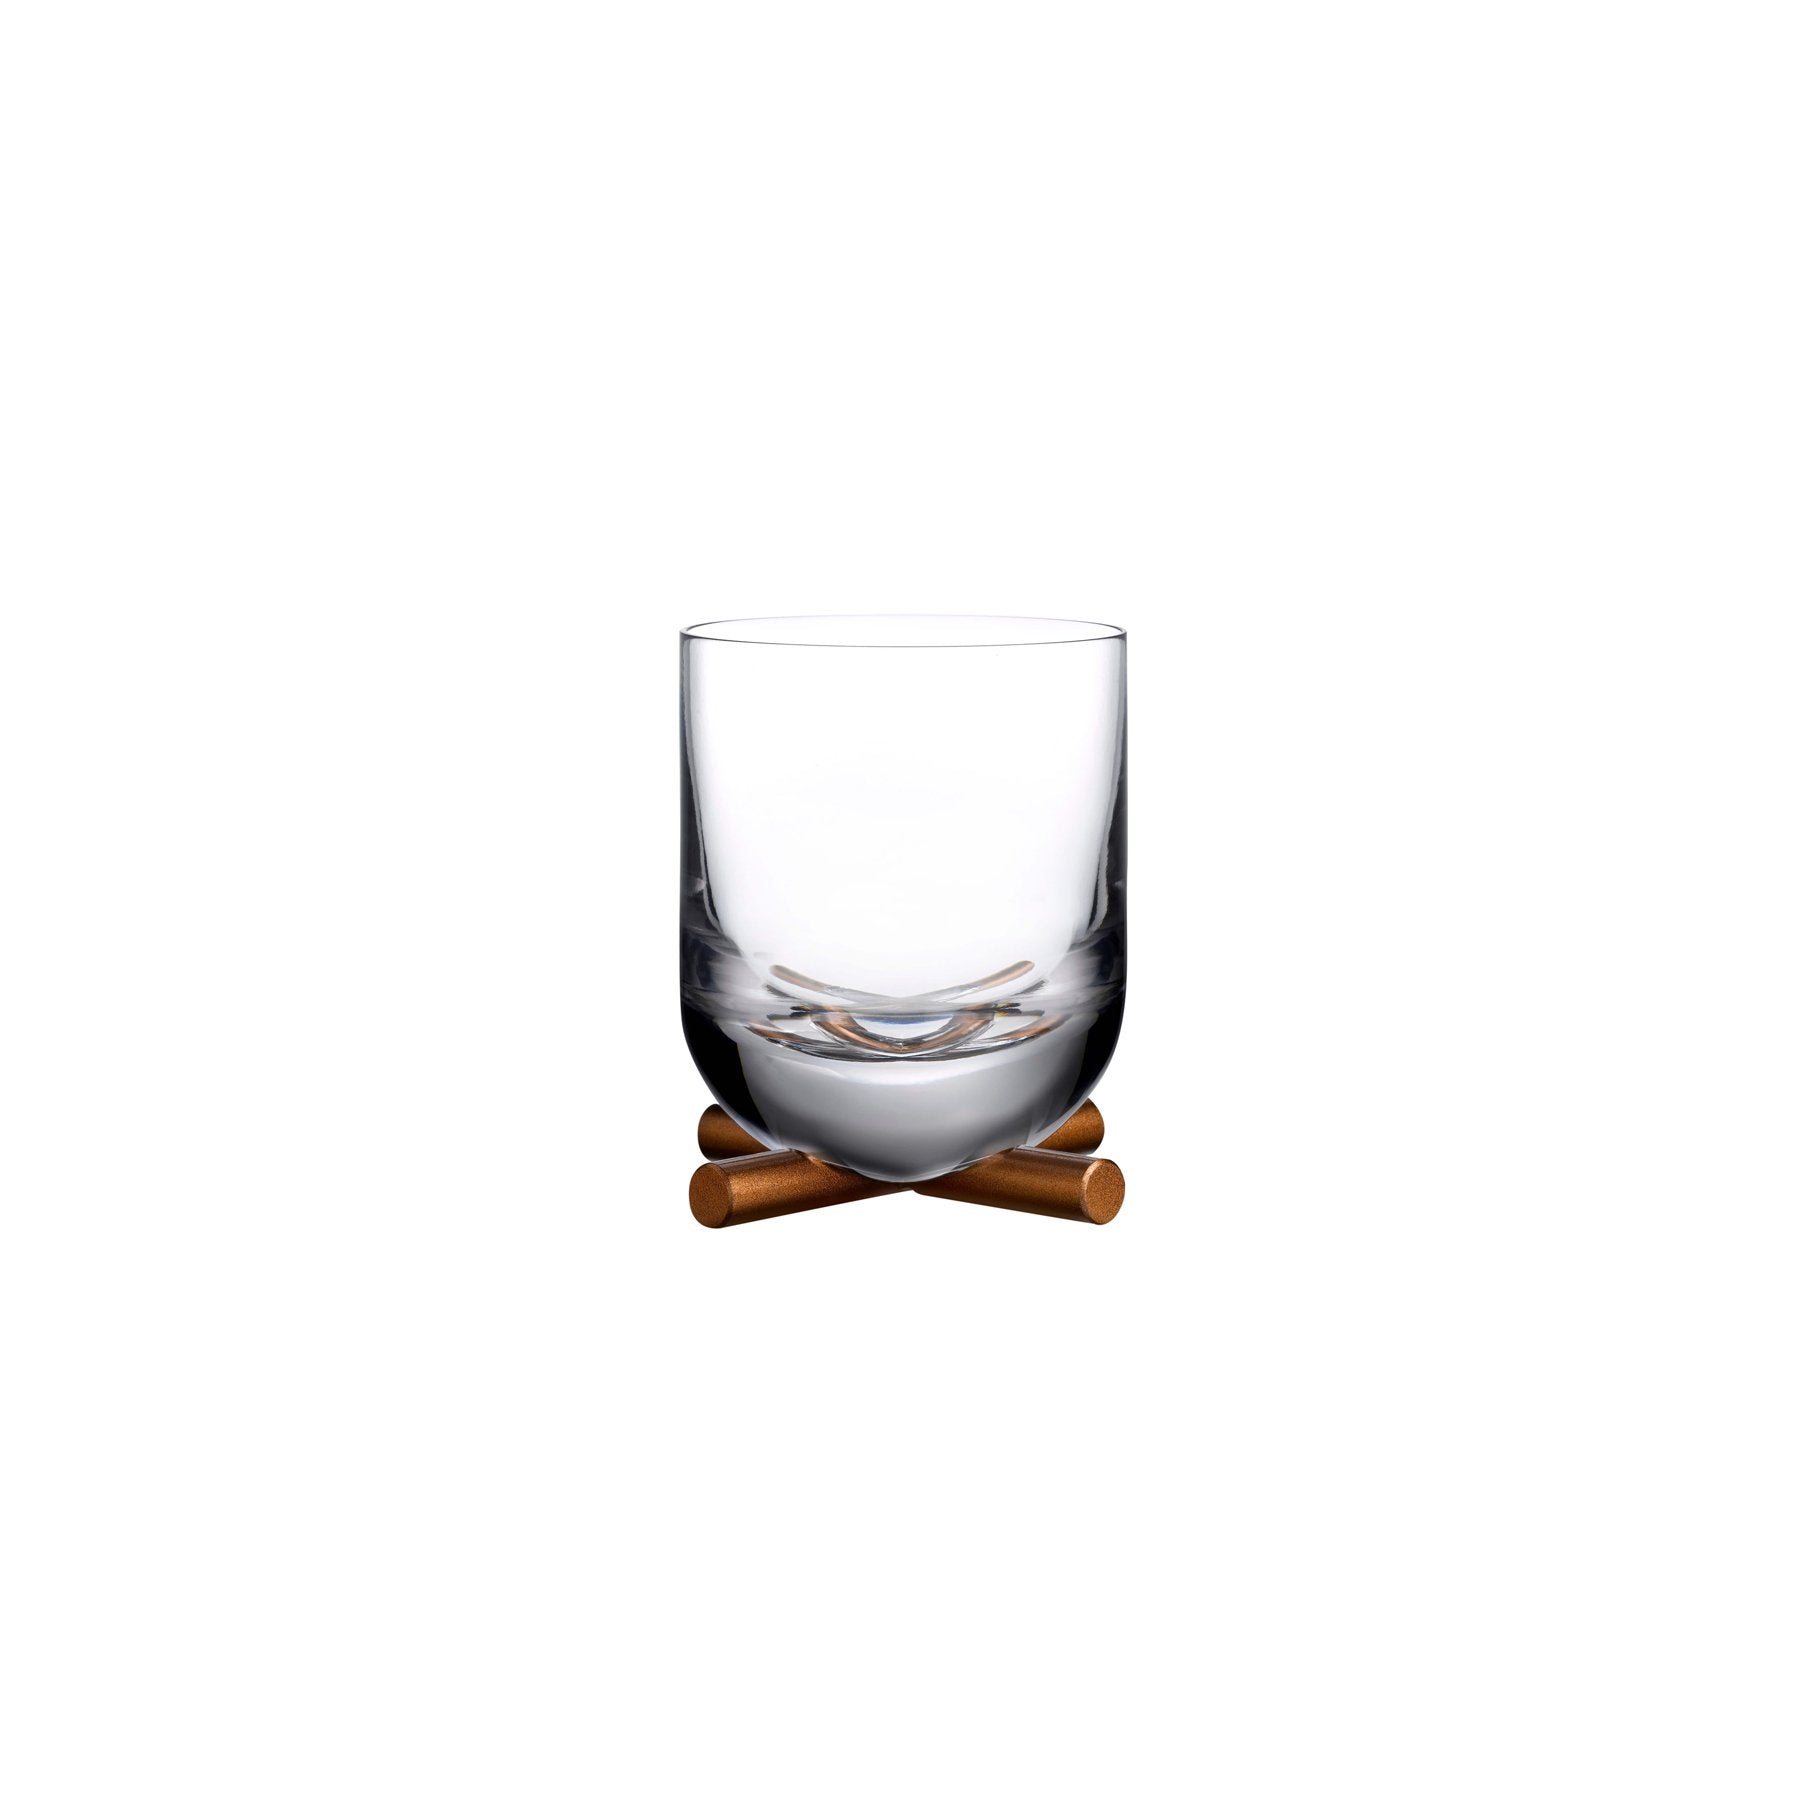 https://cdn.shopify.com/s/files/1/0481/7997/0209/products/nude-camp-whisky-sof-glass-with-brass-base-240_2000x.jpg?v=1615412279